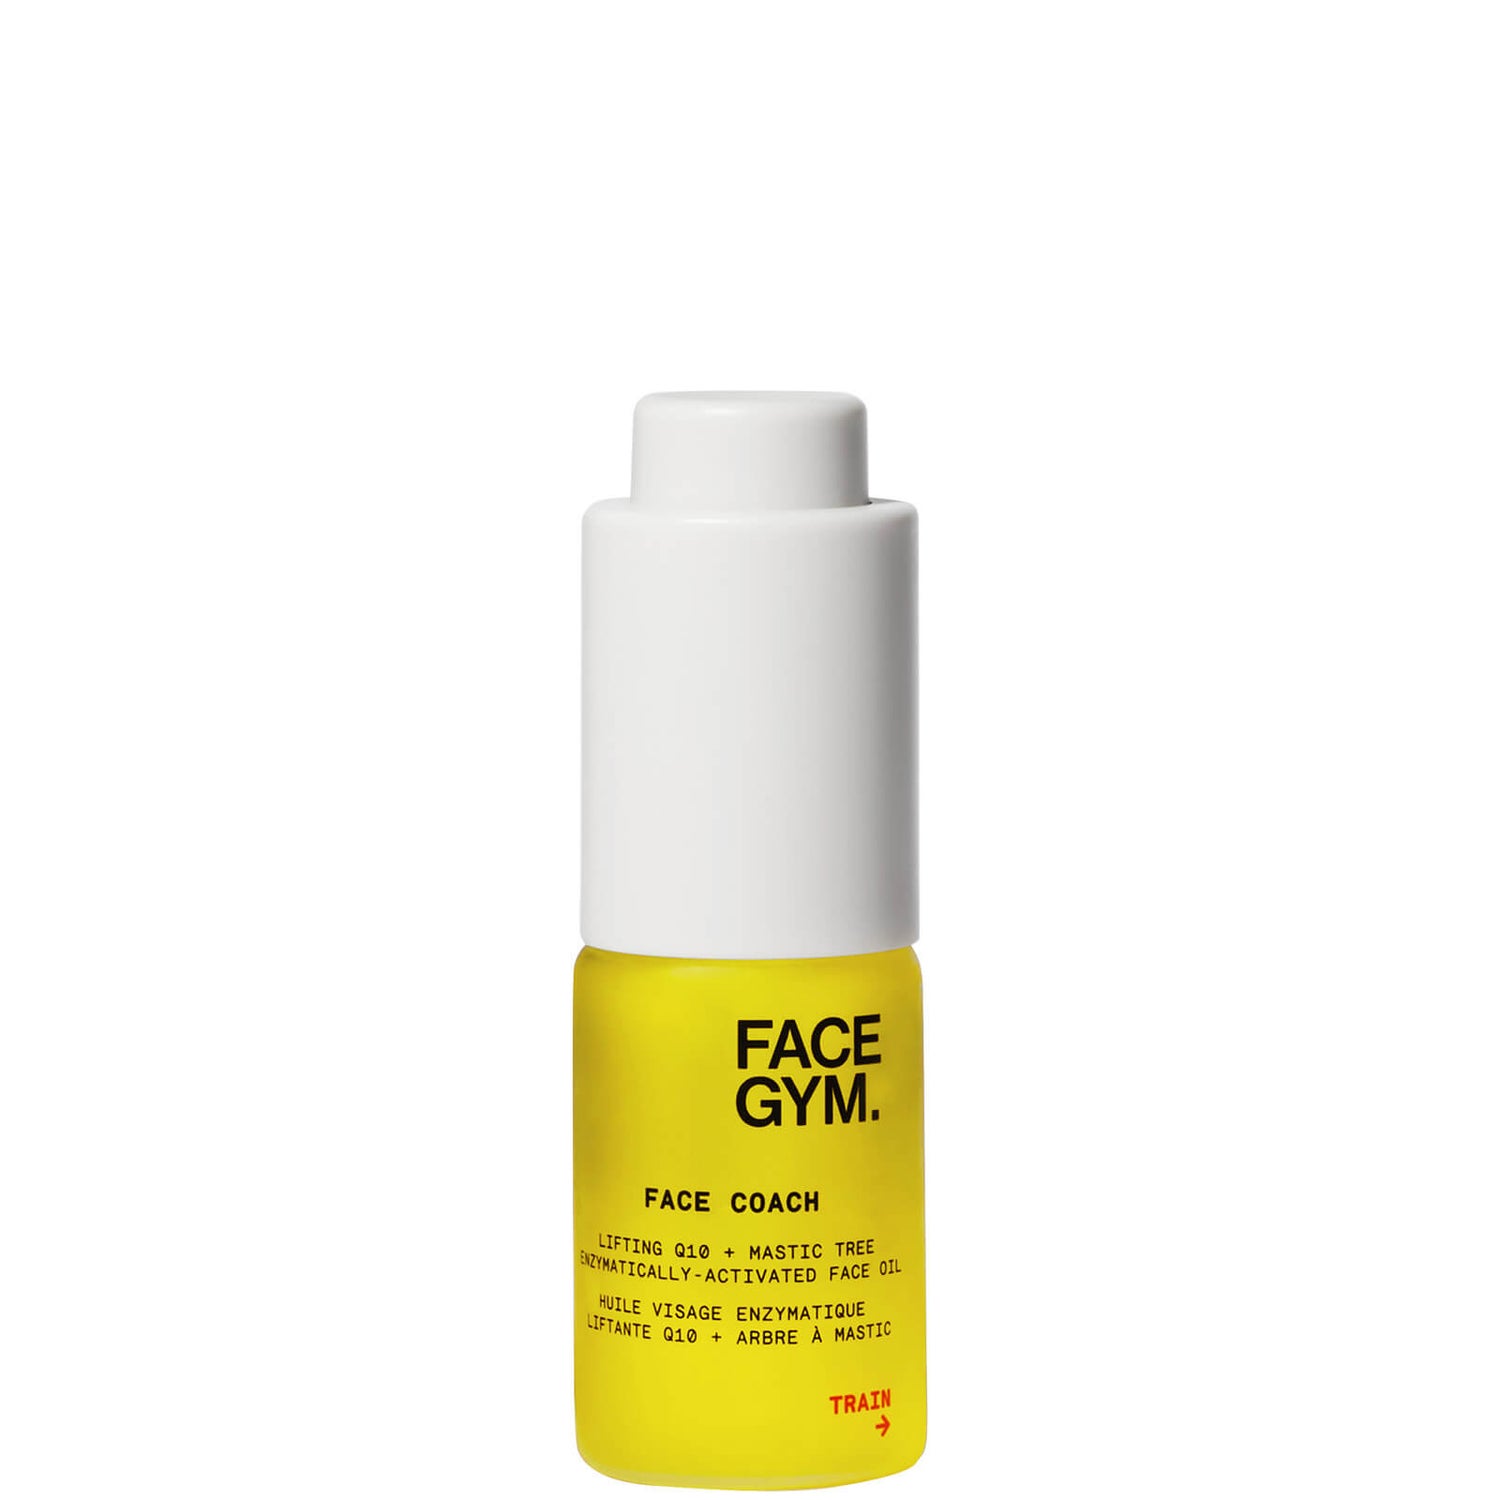 FaceGym Face Coach Lifting Q10 and Mastic Tree Enzymatically-activated Face Oil (Various Sizes)